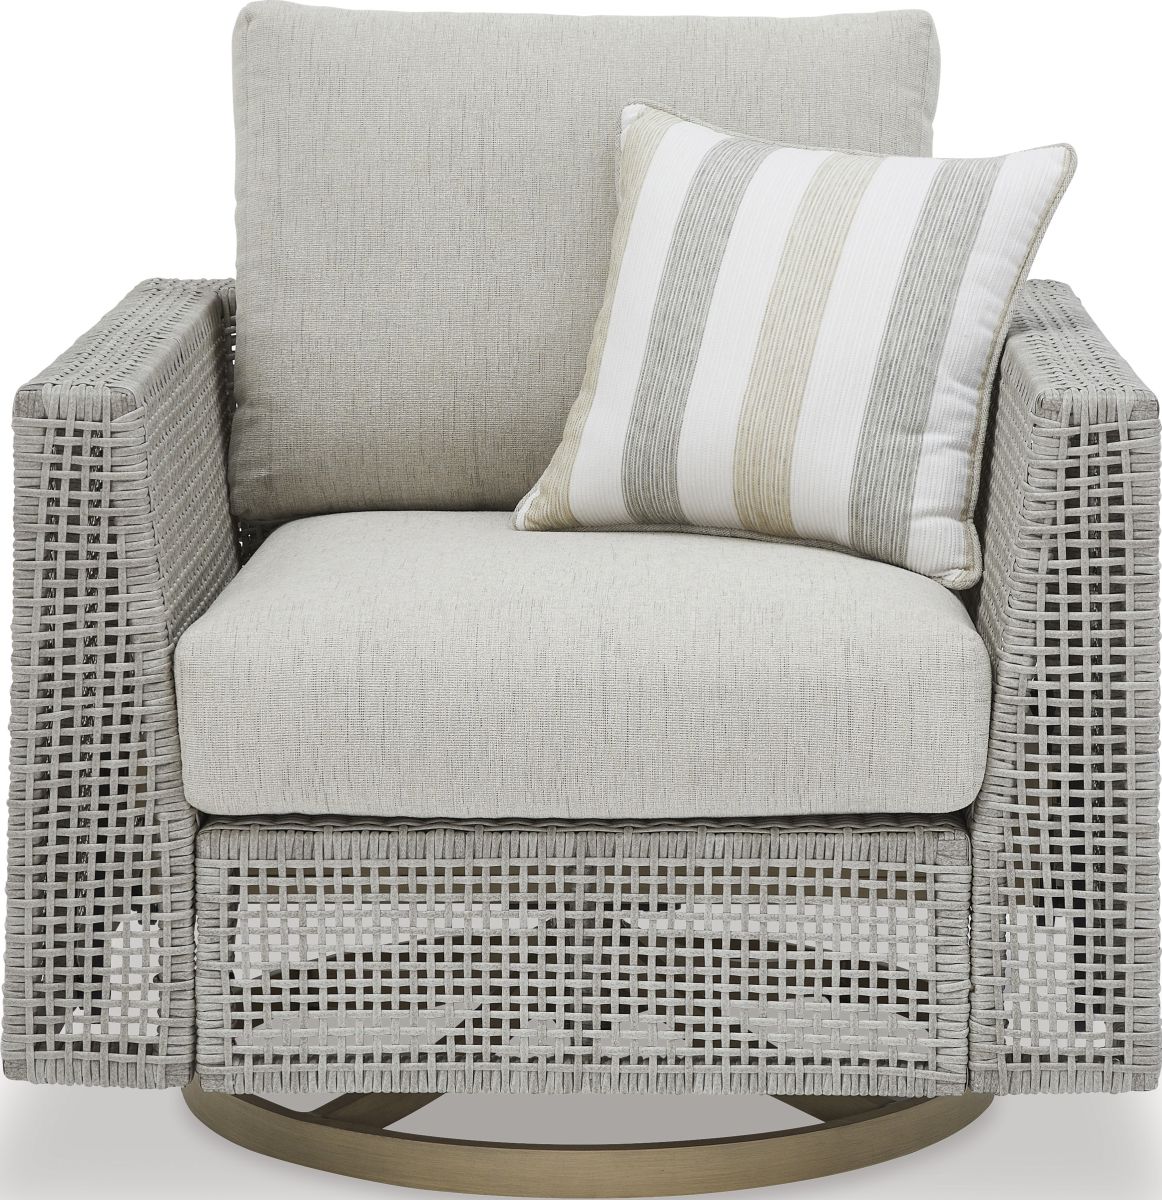 Signature Design by Ashley® Seton Creek Beige/Gray Wicker Outdoor Swivel  Lounge with Cushions